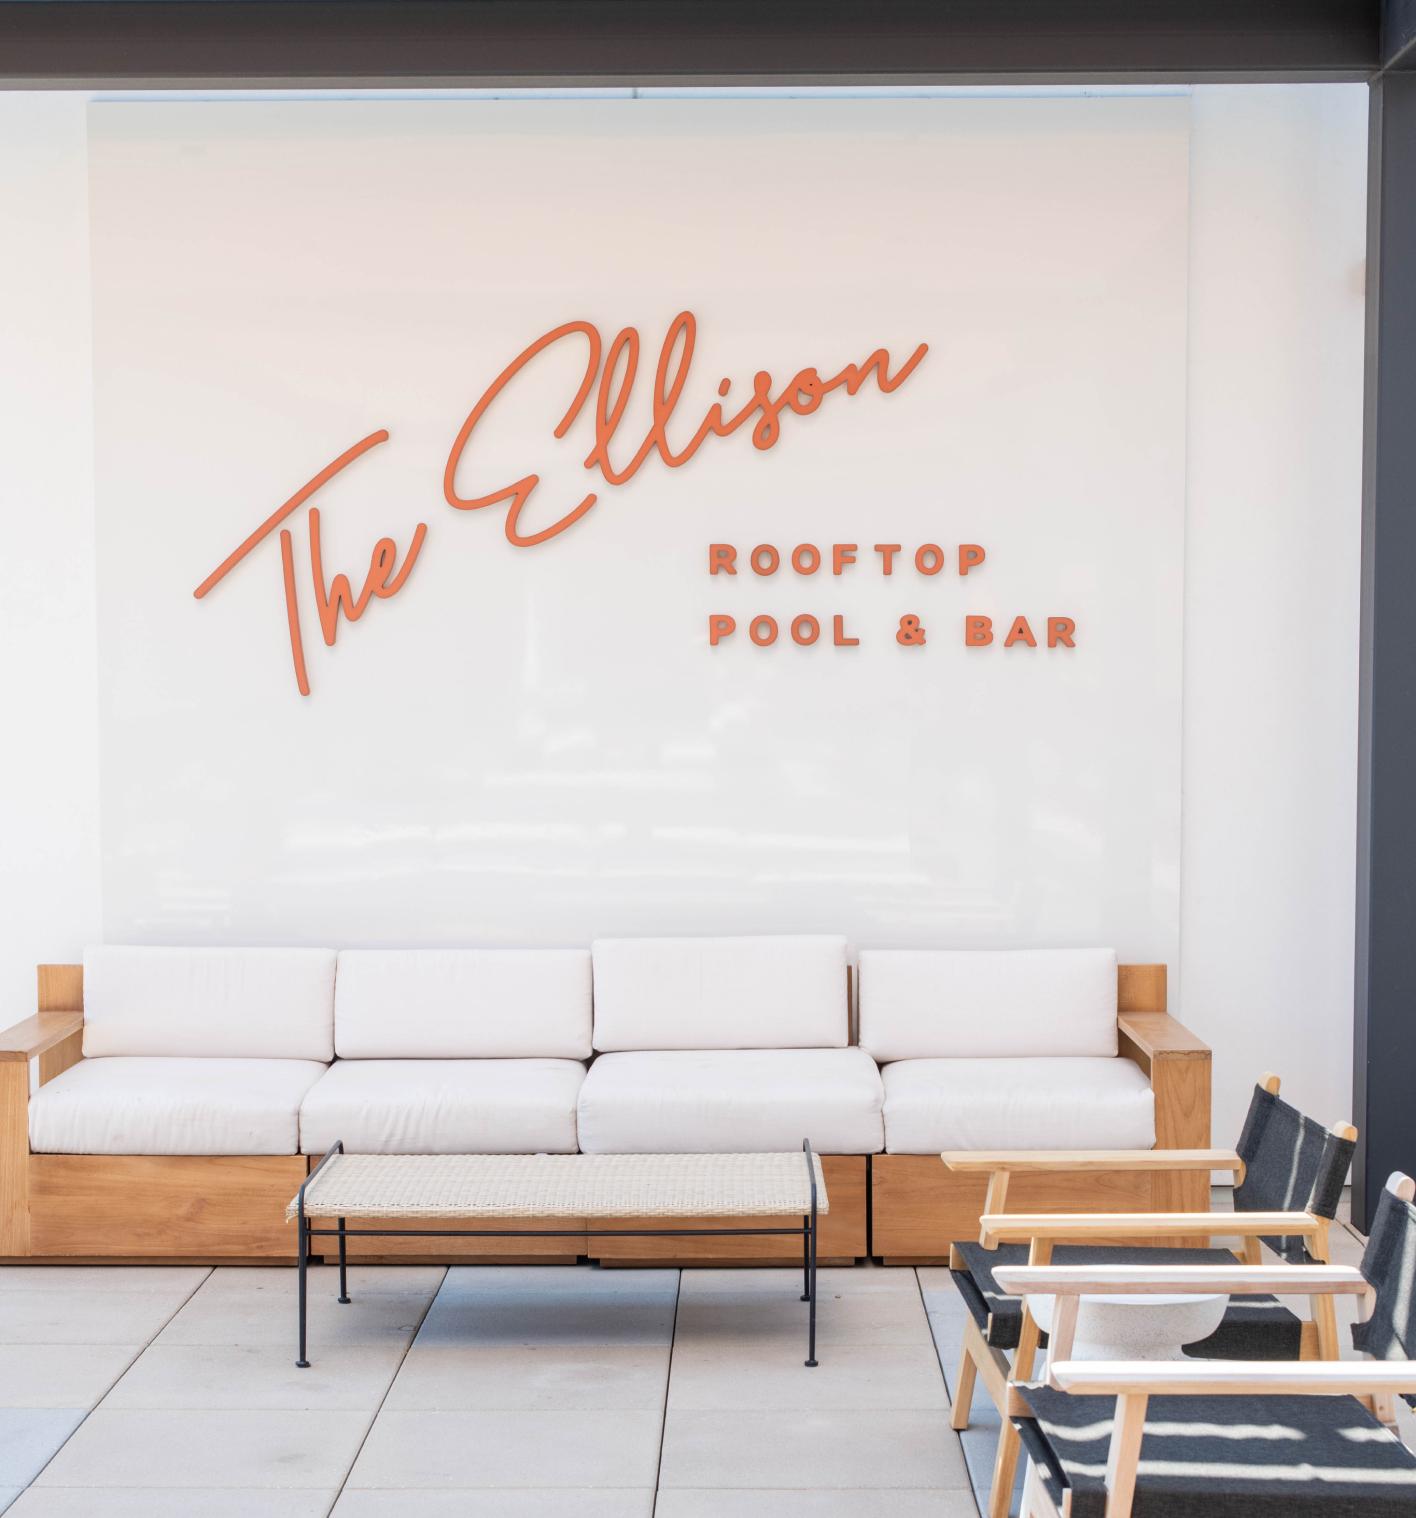 The Ellison Rooftop Pool & Bar Photography